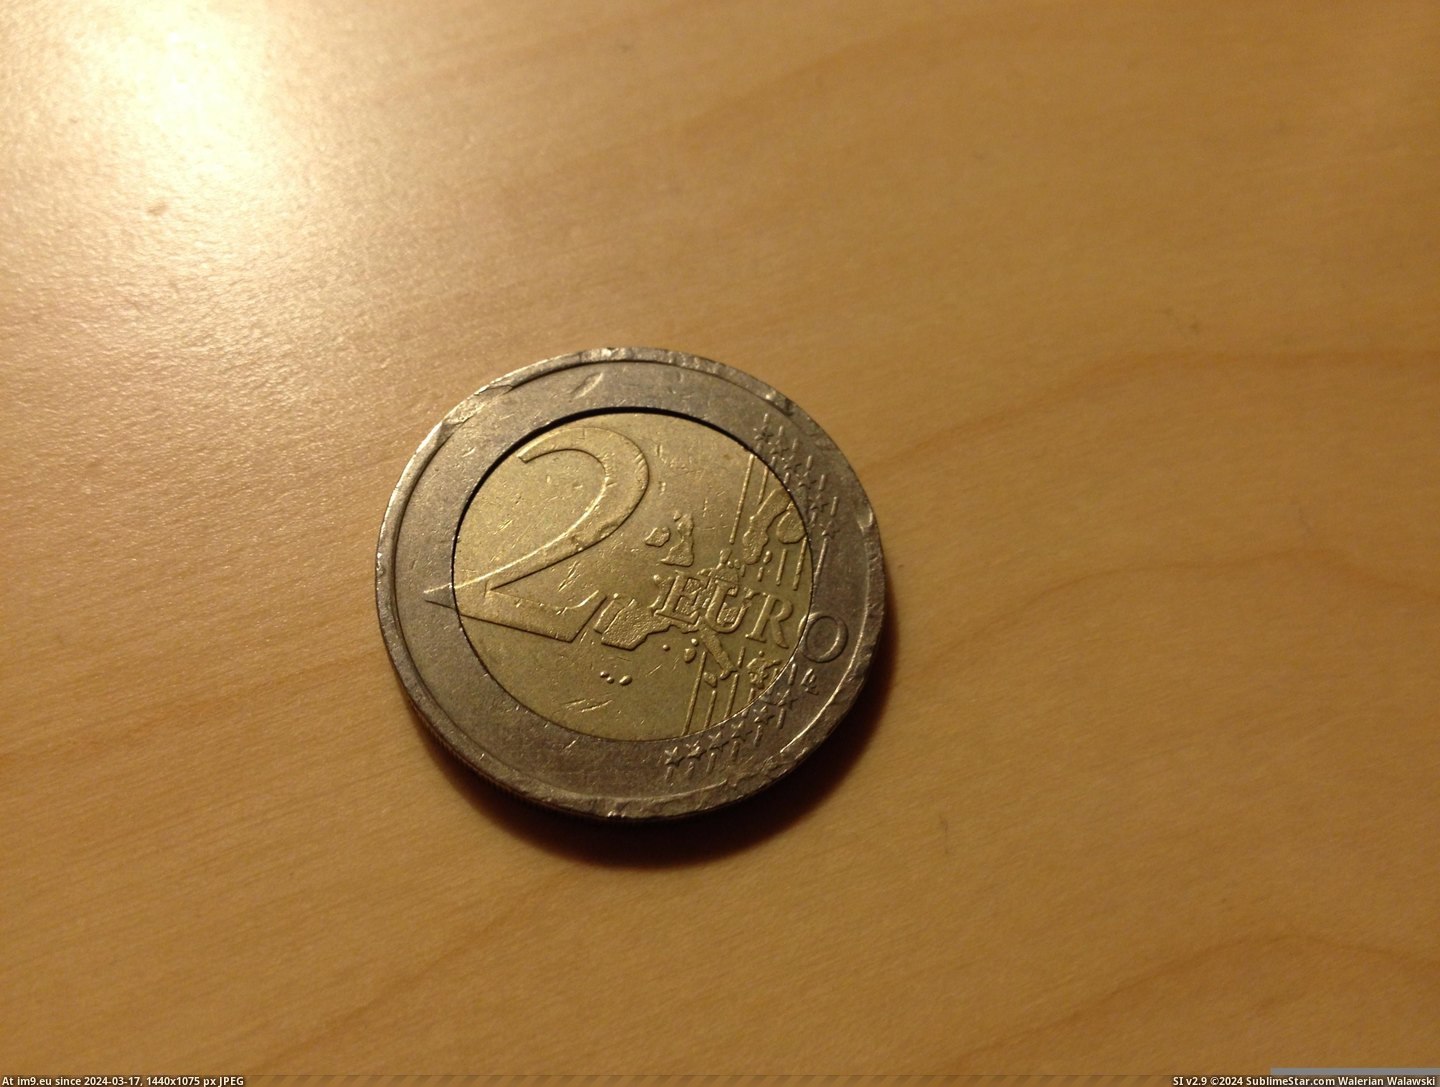 #Off #Coin #Ring [Mildlyinteresting] The ring from this coin comes off 1 Pic. (Bild von album My r/MILDLYINTERESTING favs))